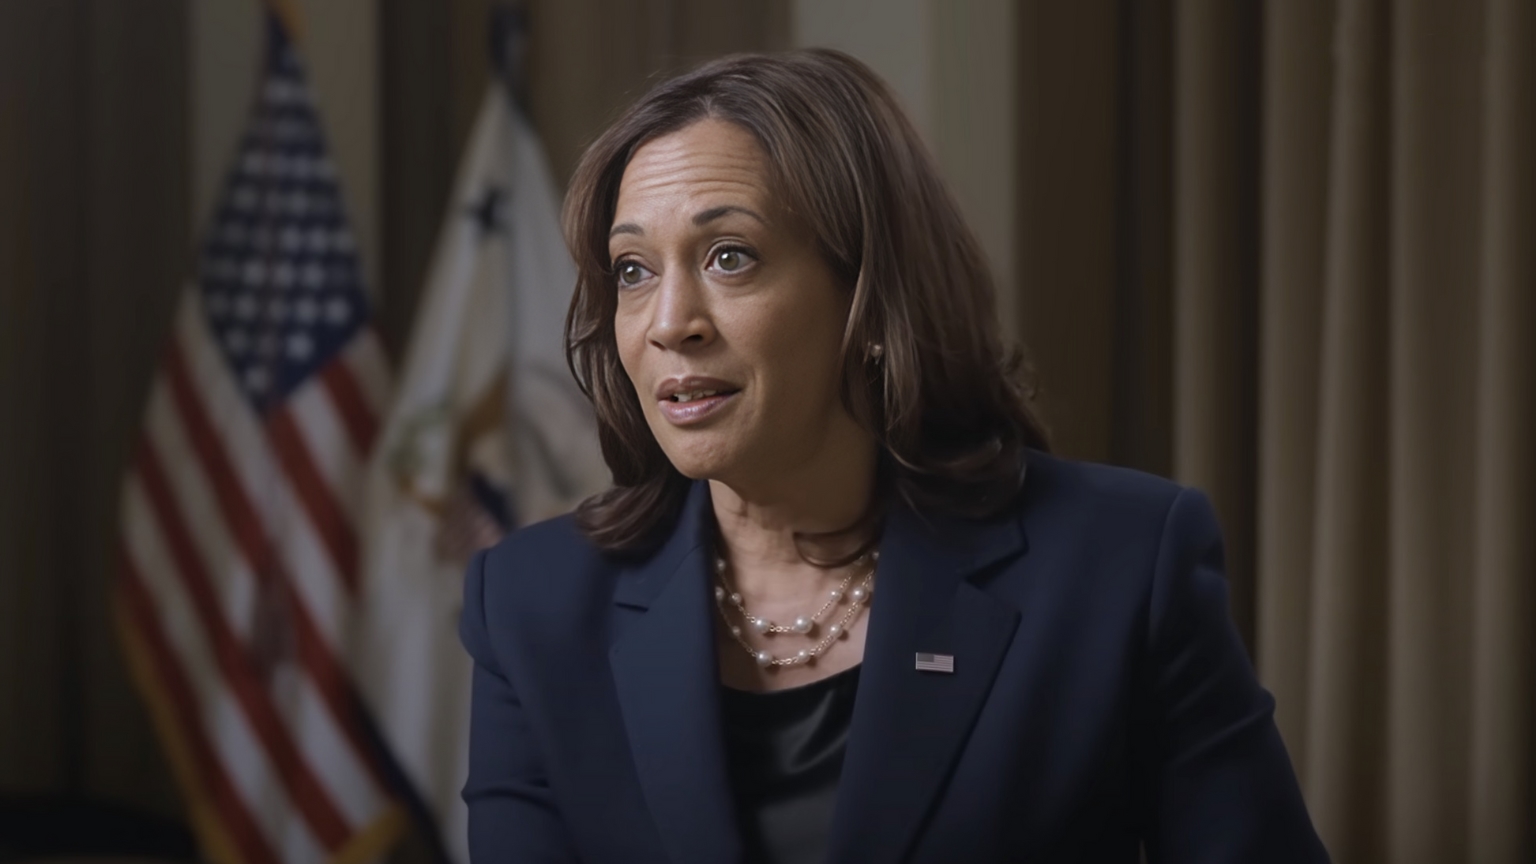 VP Kamala Harris would “require” social media to work with The White House to protect “democracy”